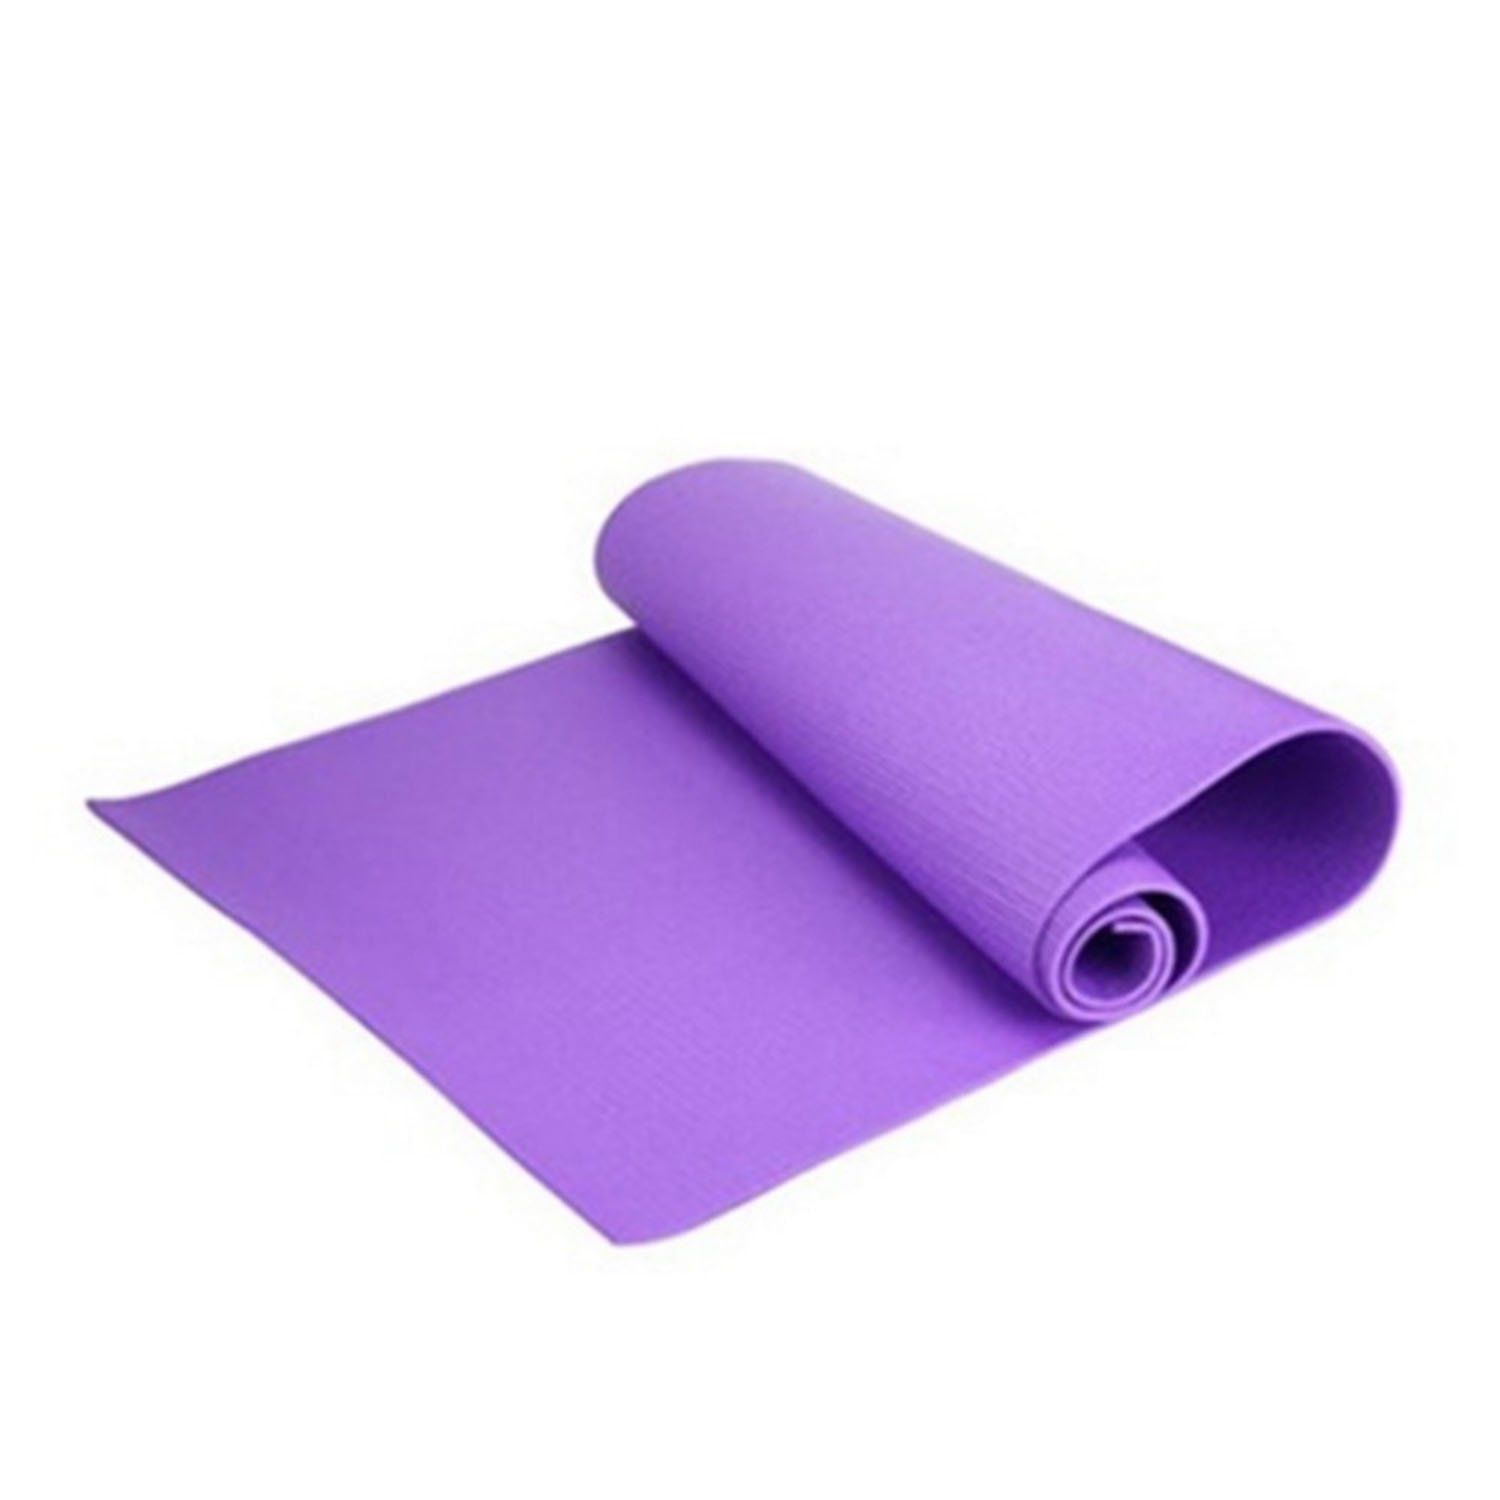 mat - Natural Tree Rubber yoga Mat, Eco Friendly ,Non Slip, Dense  Cushioning for Support and Stability in Yoga, Pilates, and General Fitness